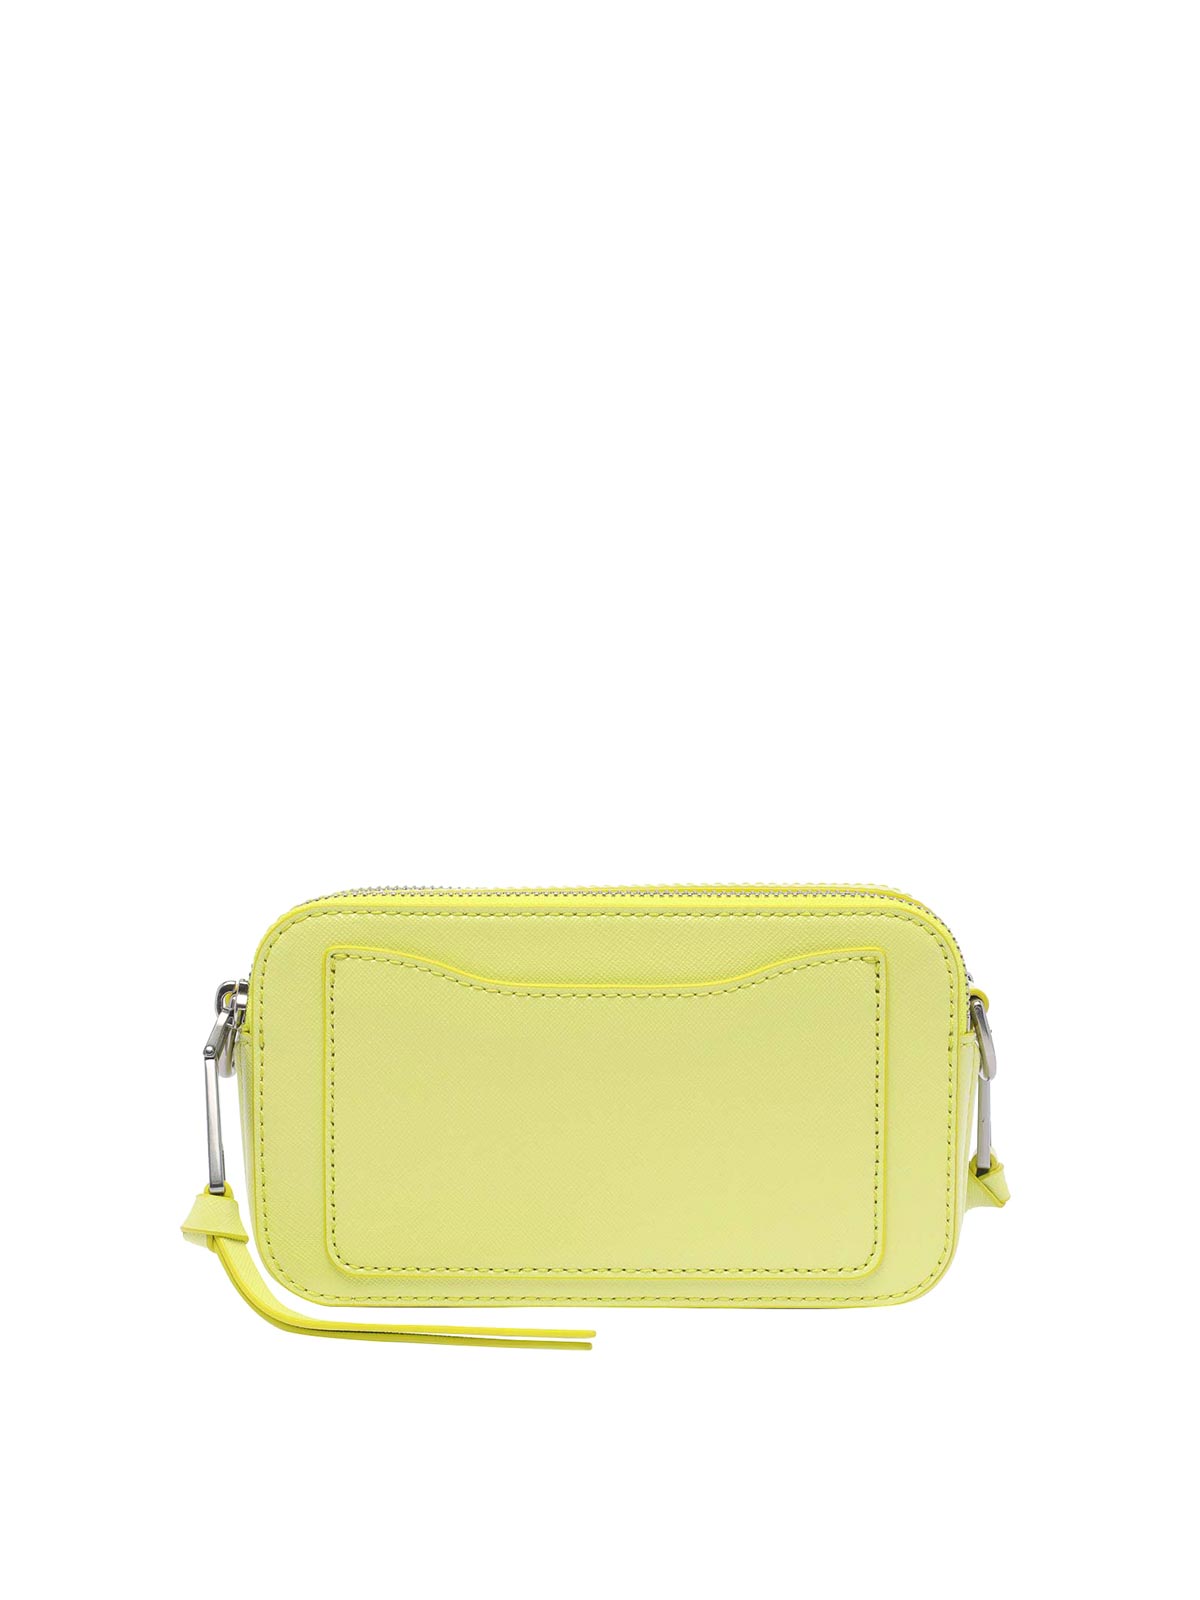 Stylish Marc Jacobs Jelly Camera Bag in Neon Yellow